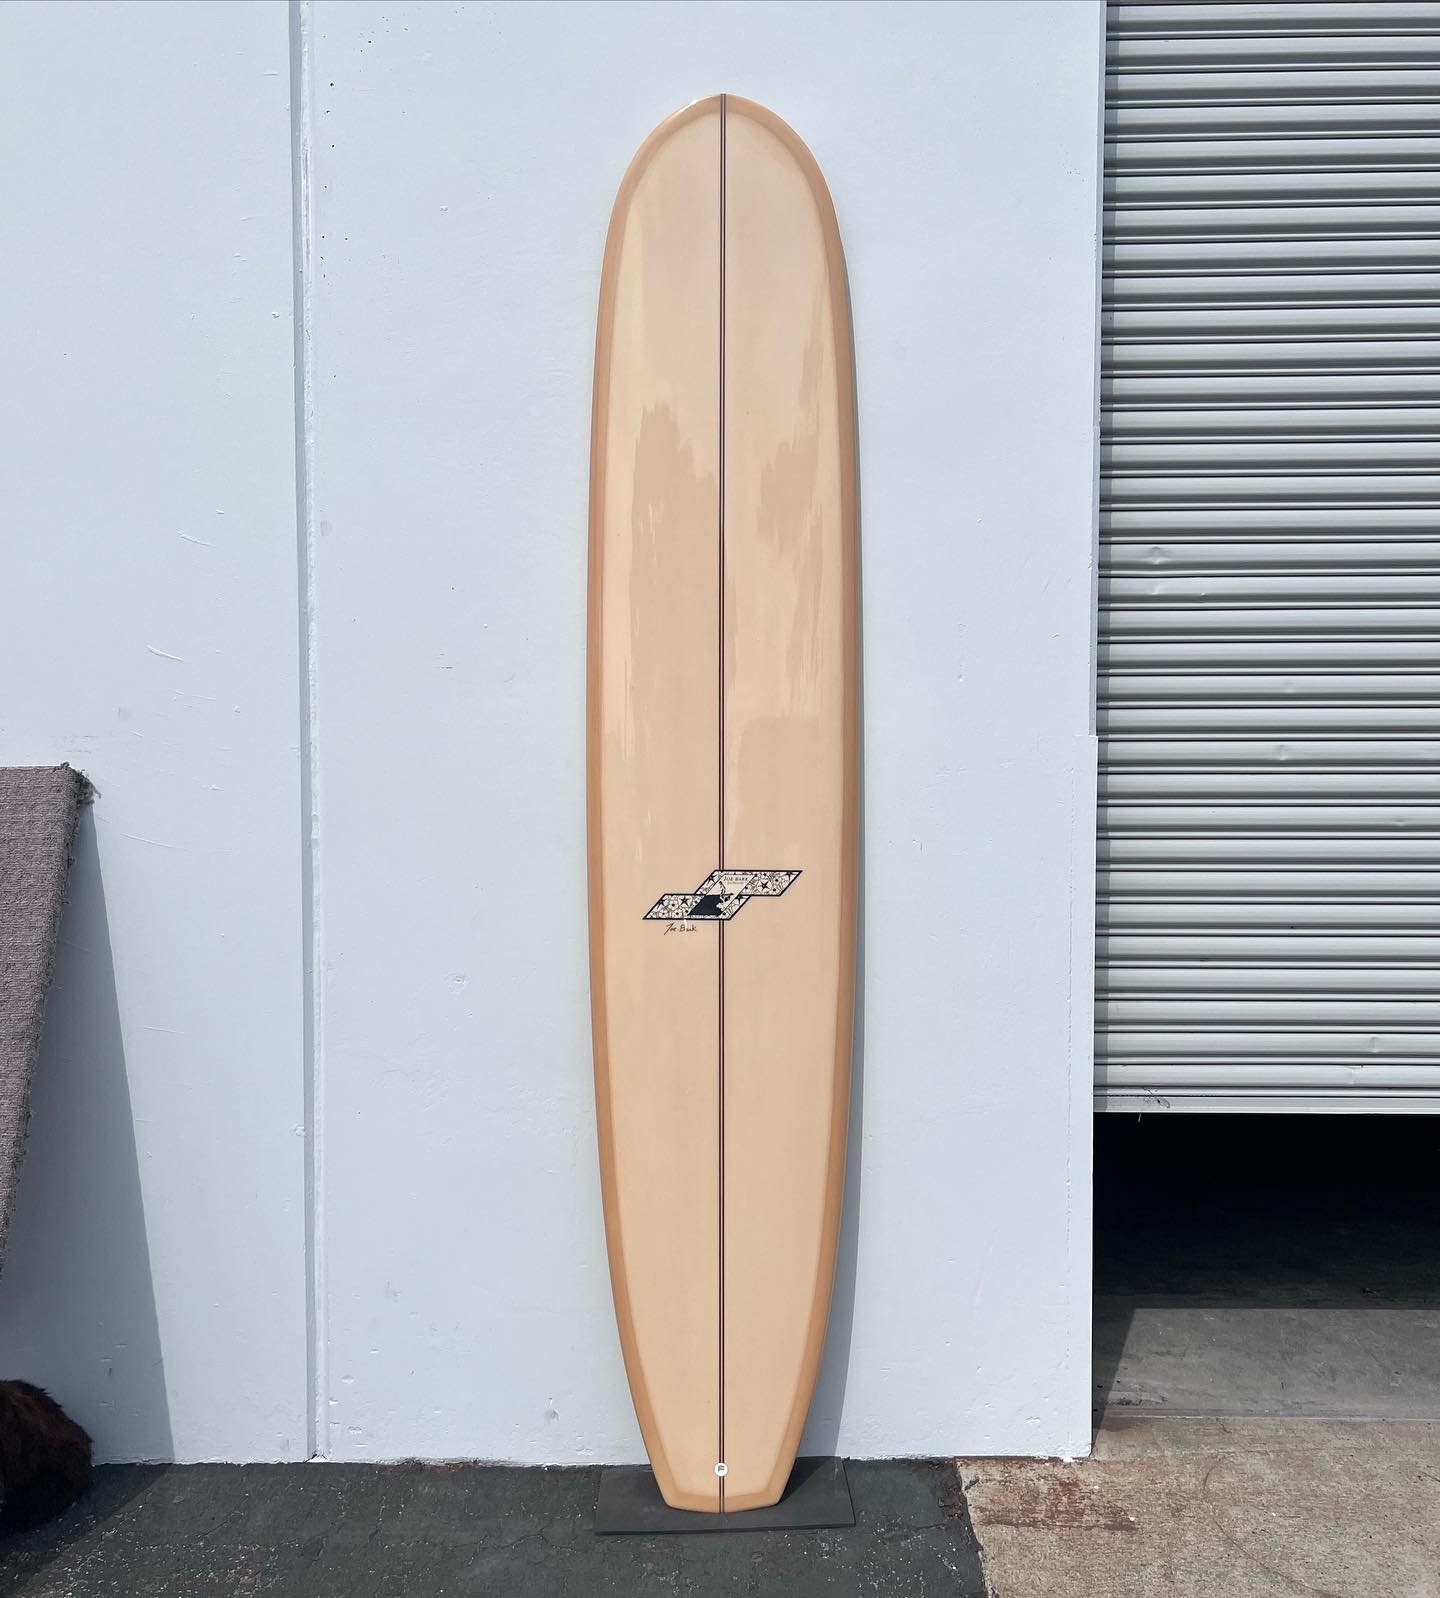 This 9&rsquo;6 Bark Noserider is being raffled off as part of the NAC / We Are Ocean cancer fundraiser, &ldquo;A Sea of Support&rdquo;. Tickets are now for sale on our site. Online tickets will be available until May 2nd, and in person tickets will b